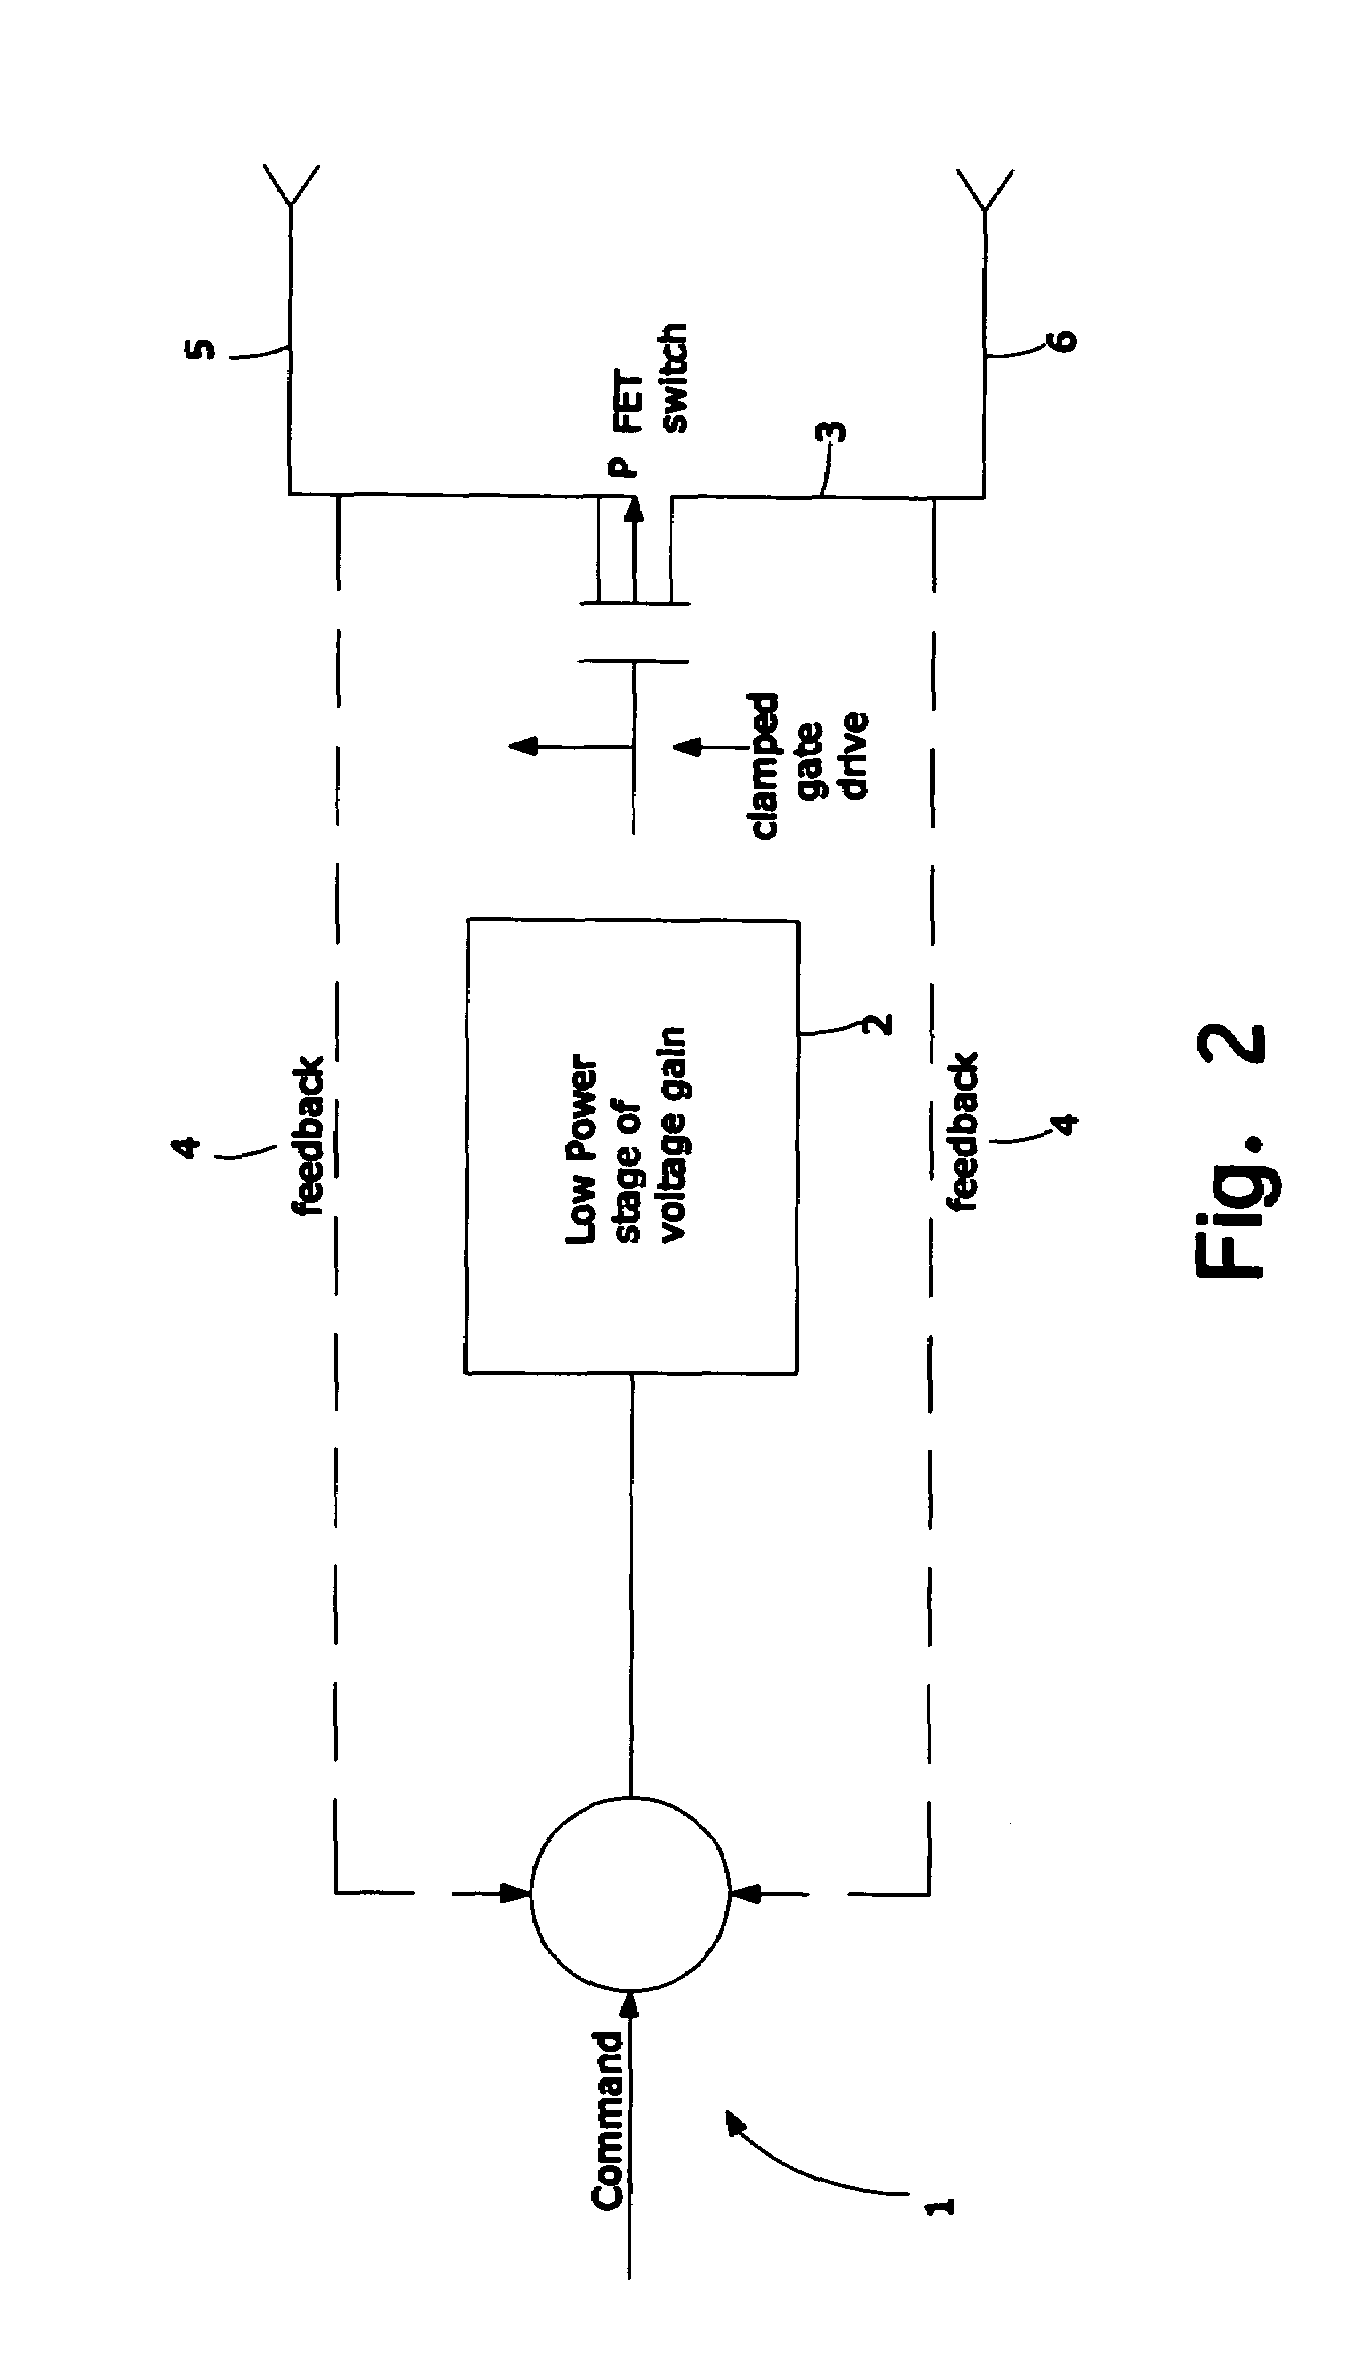 Radiation tolerant solid-state relay